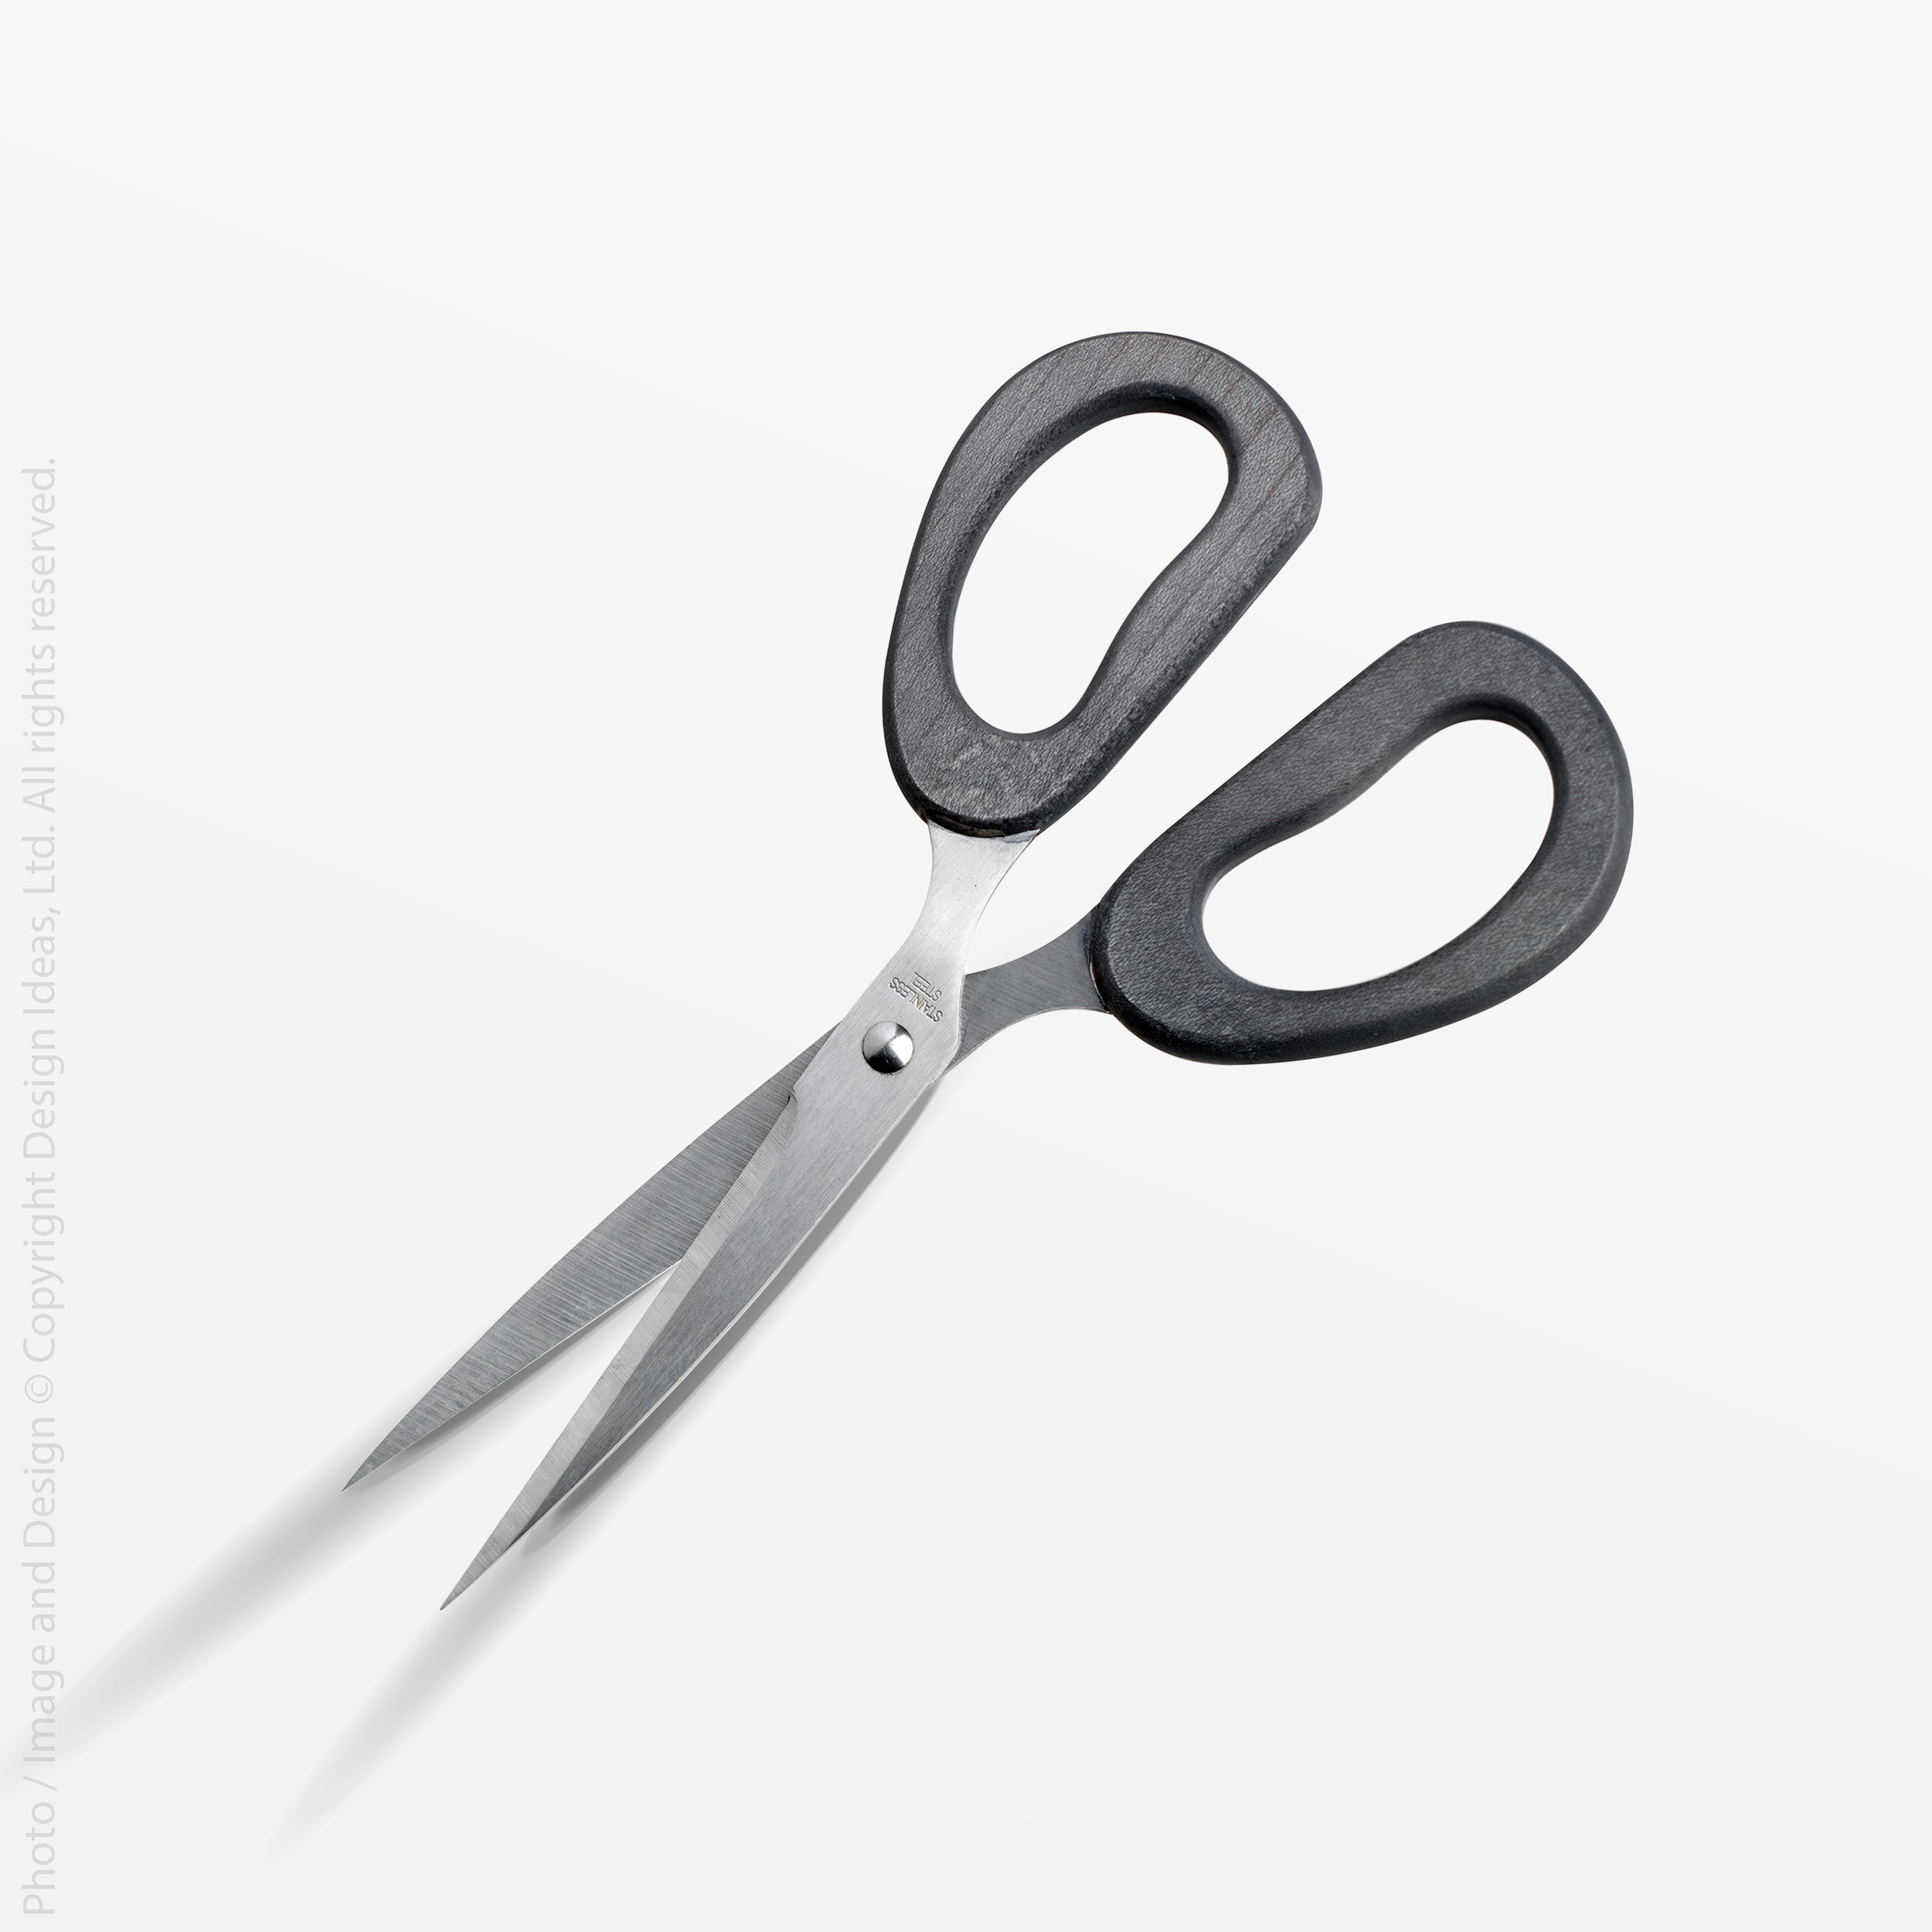 Cokala™ scissors - Black | Image 2 | Premium Desk Accessory from the Cokala collection | made with Sycamore for long lasting use | texxture